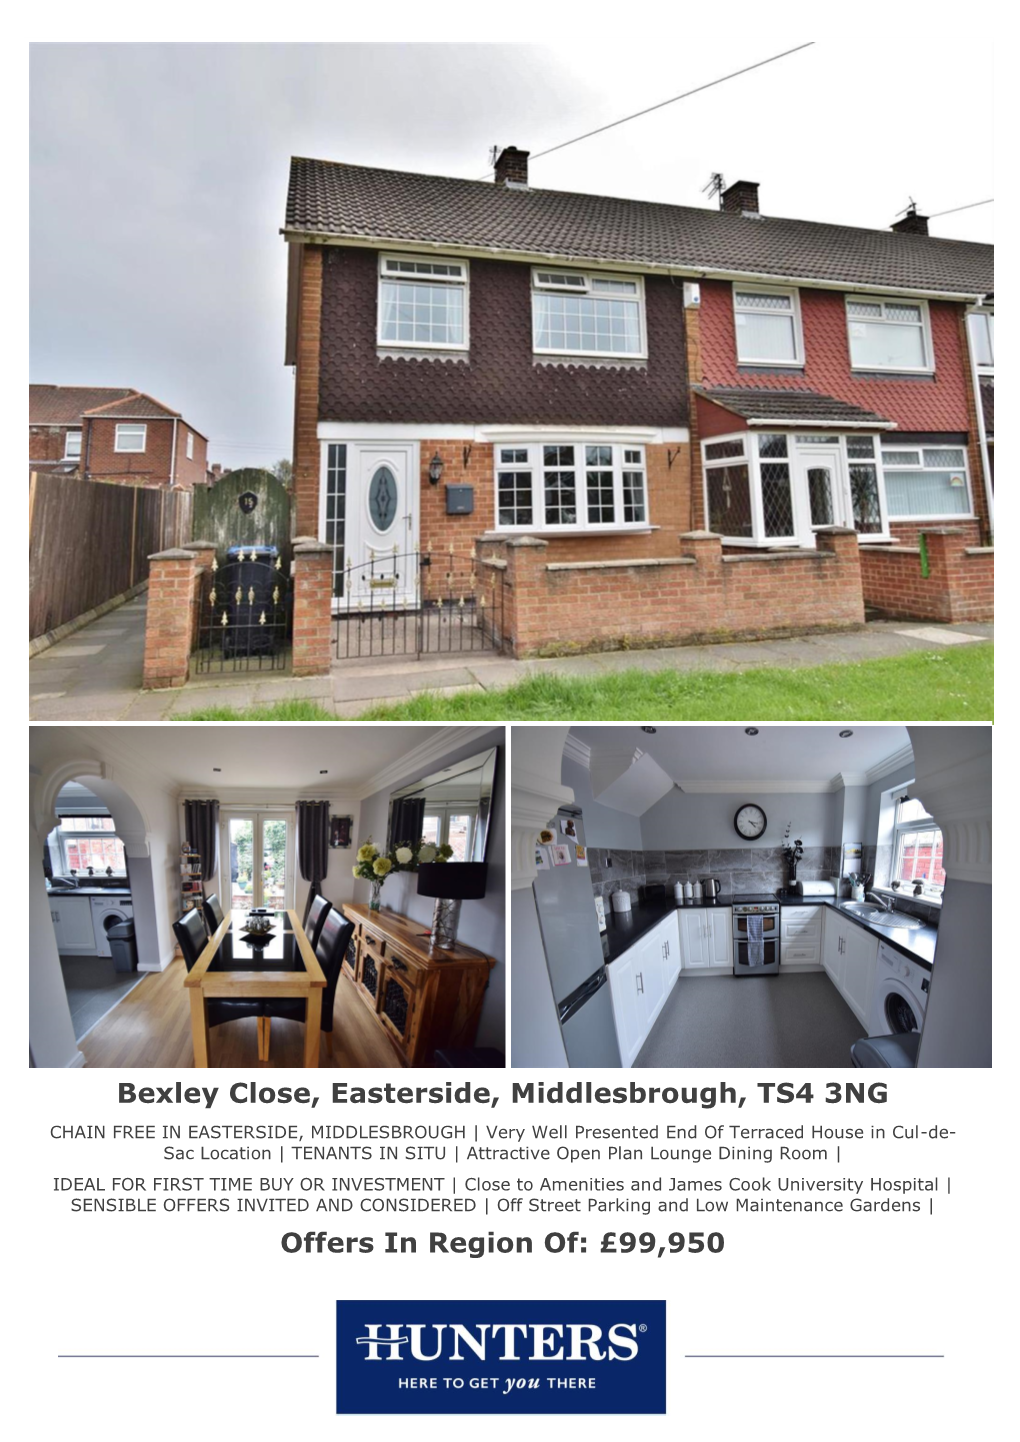 Bexley Close, Easterside, Middlesbrough, TS4 3NG Offers In